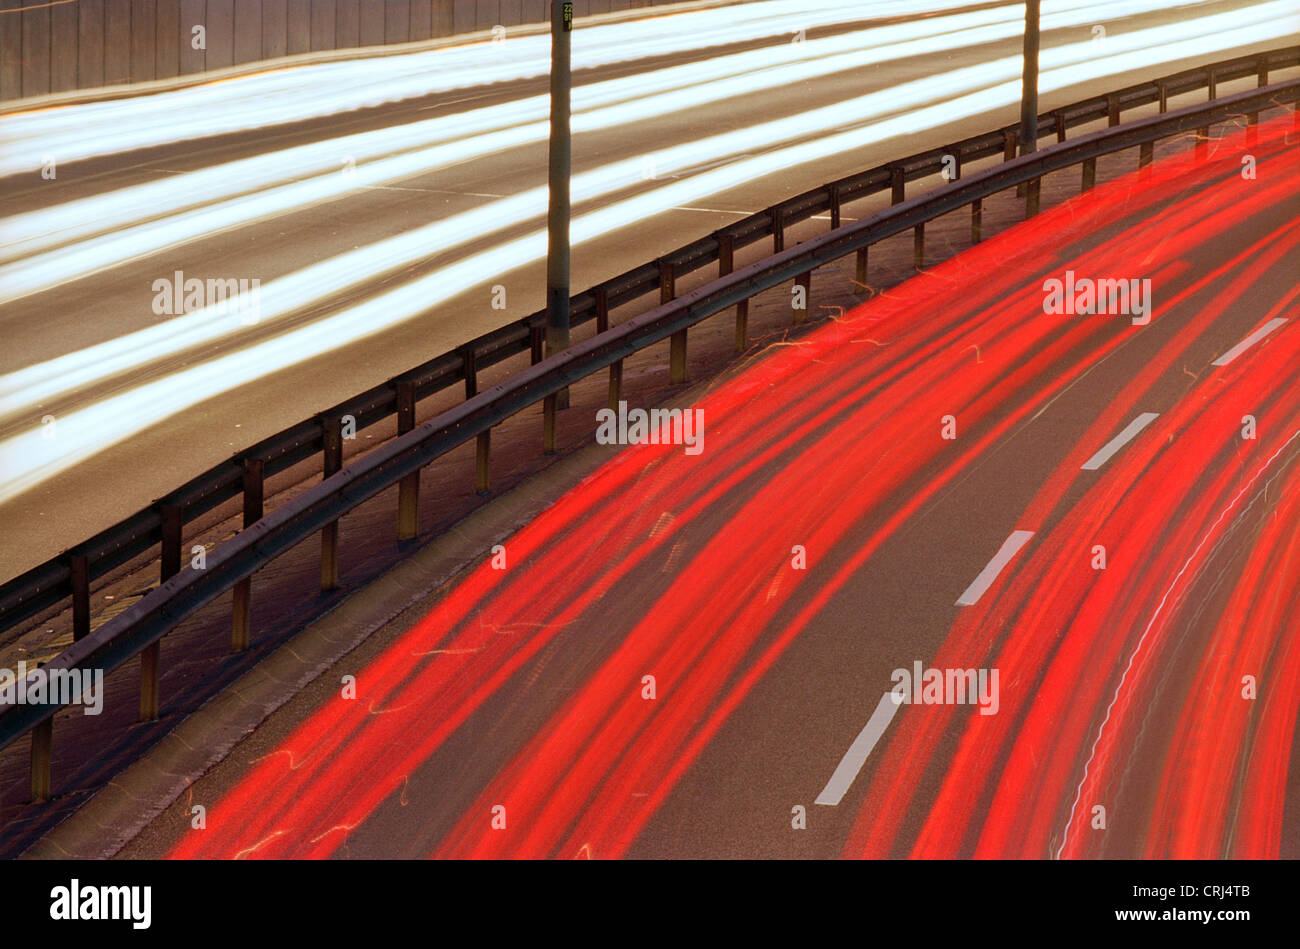 Light trails of vehicles on the freeway at night Stock Photo